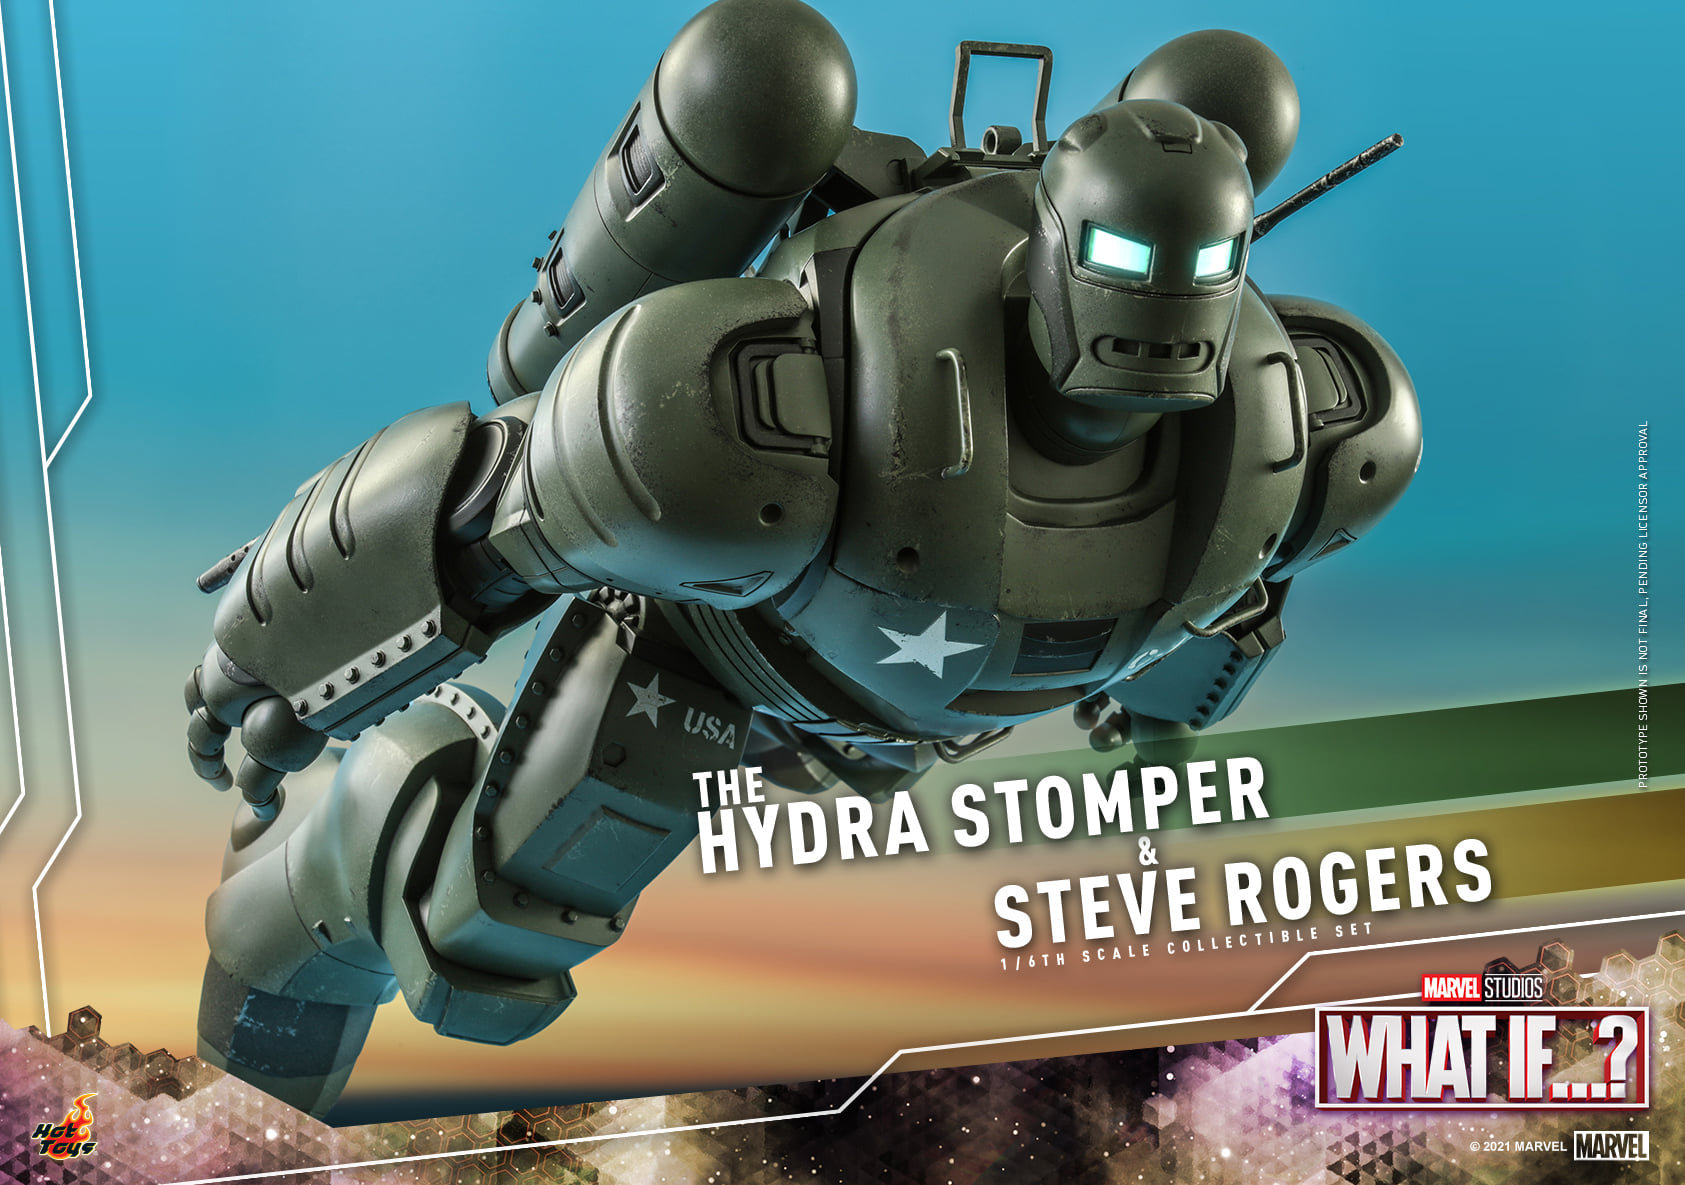 Hot Toys - TMS060 - What If…? - The Hydra Stomper &amp; Steve Rogers - Marvelous Toys